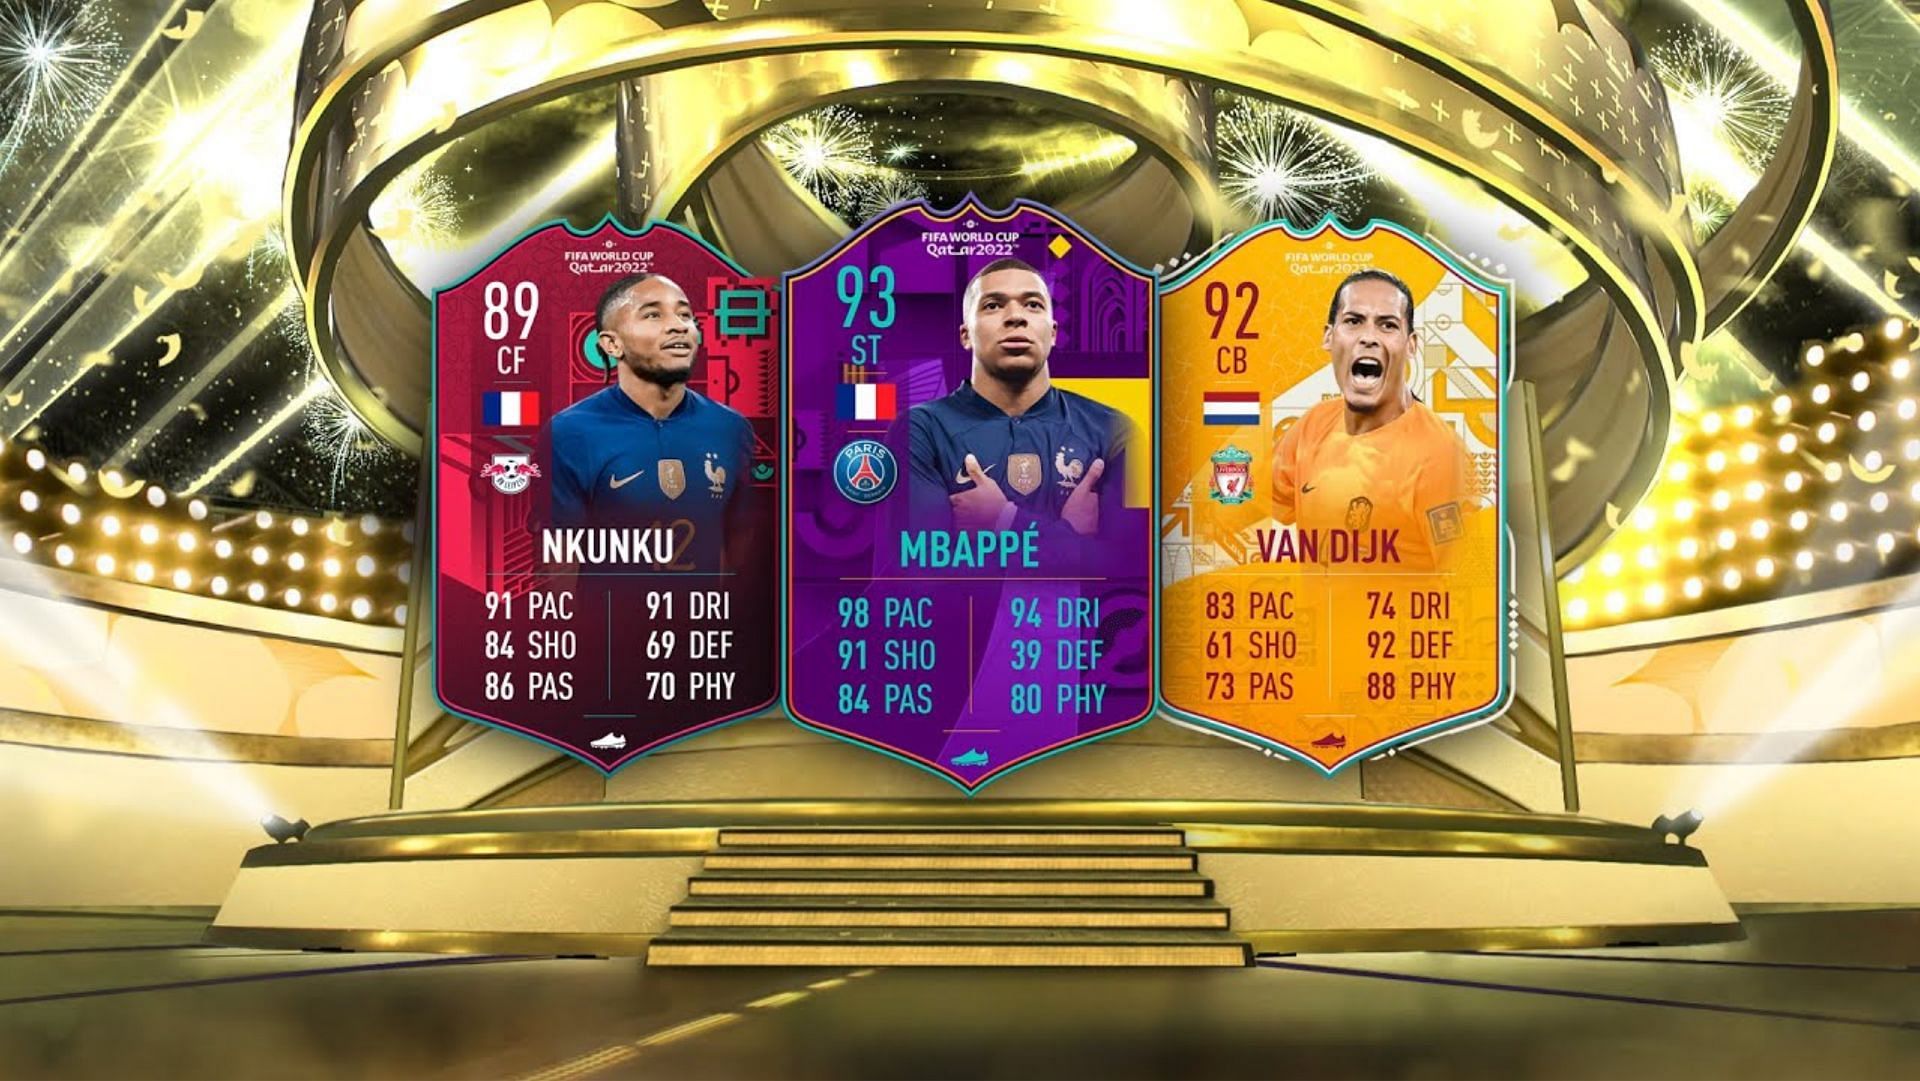 The Season 2 Review Pack guarantees a promo card from the FUT WC content (Image via YouTube/Homelesspenguin)